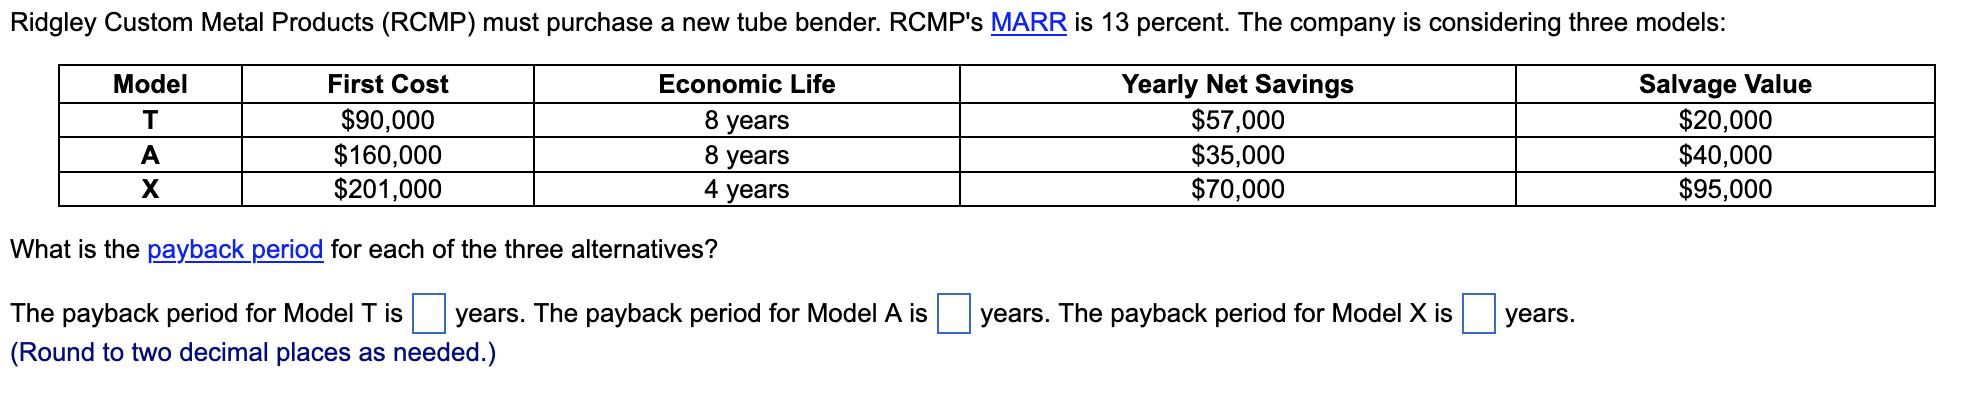 Ridgley Custom Metal Products (RCMP) must purchase a new tube bender. RCMP's MARR is 13 percent. The company